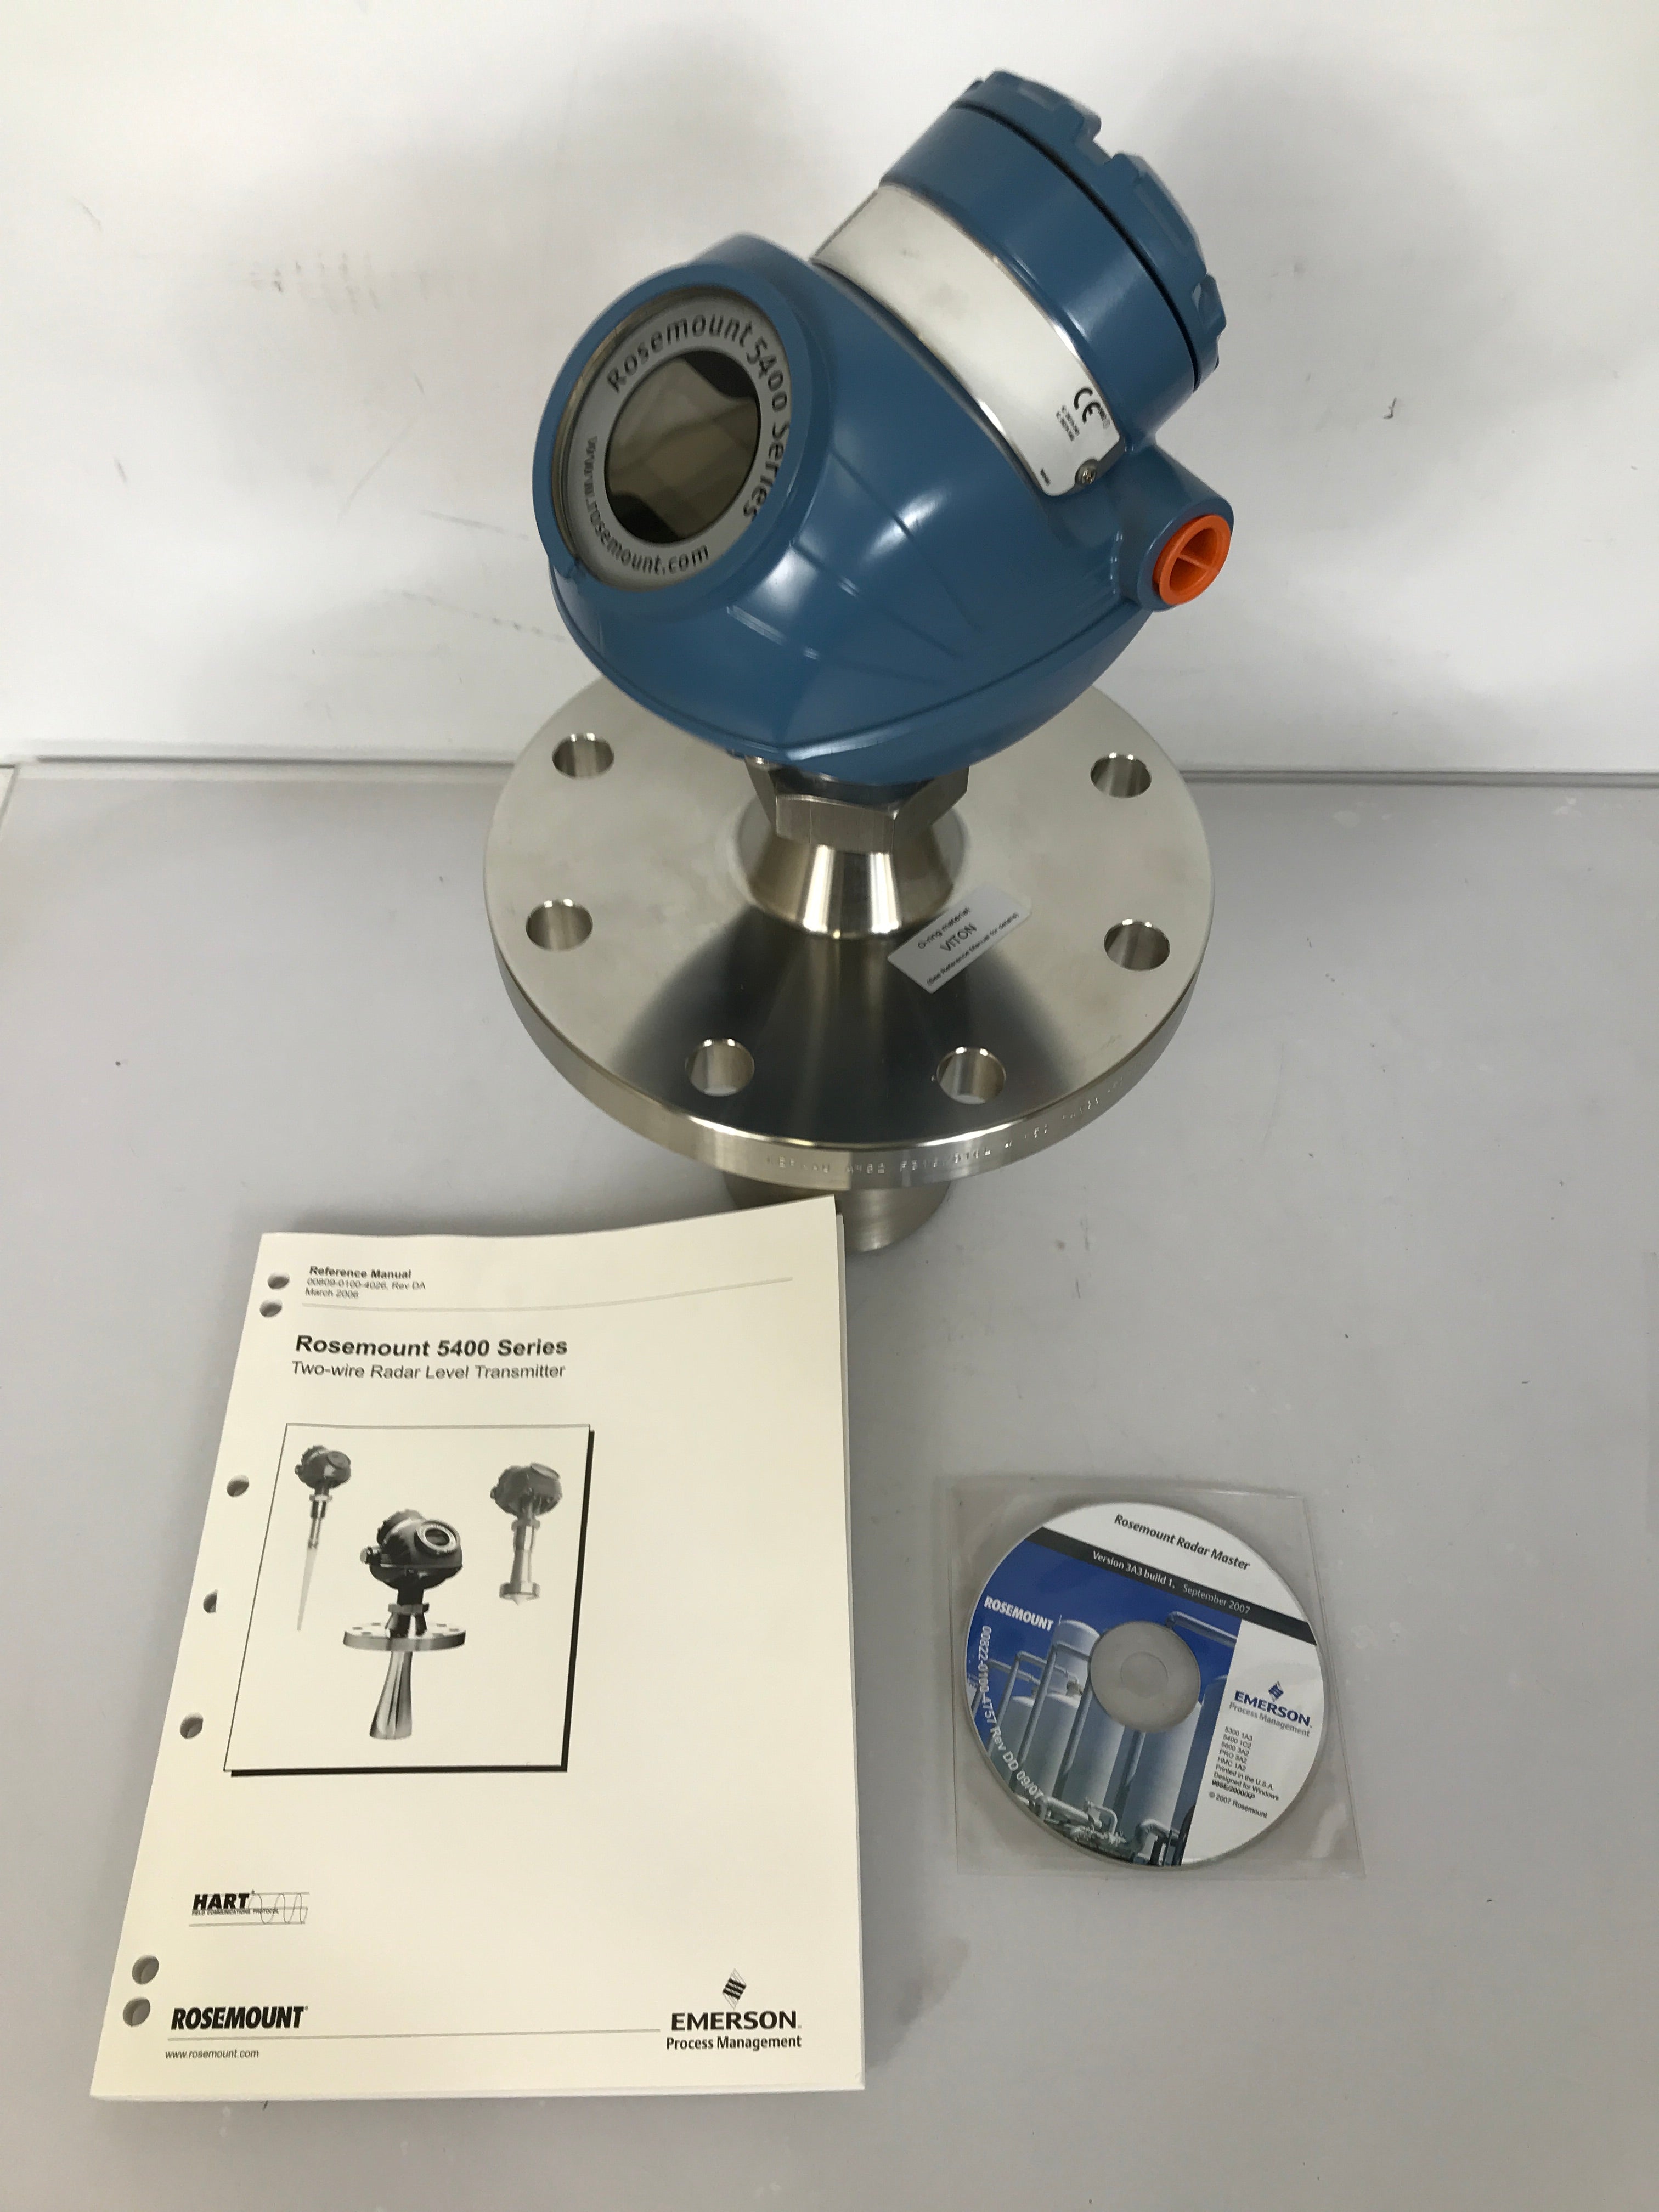 Rosemount 5400 Series Two-Wire Radar Level Transmitter with Box *Untested*